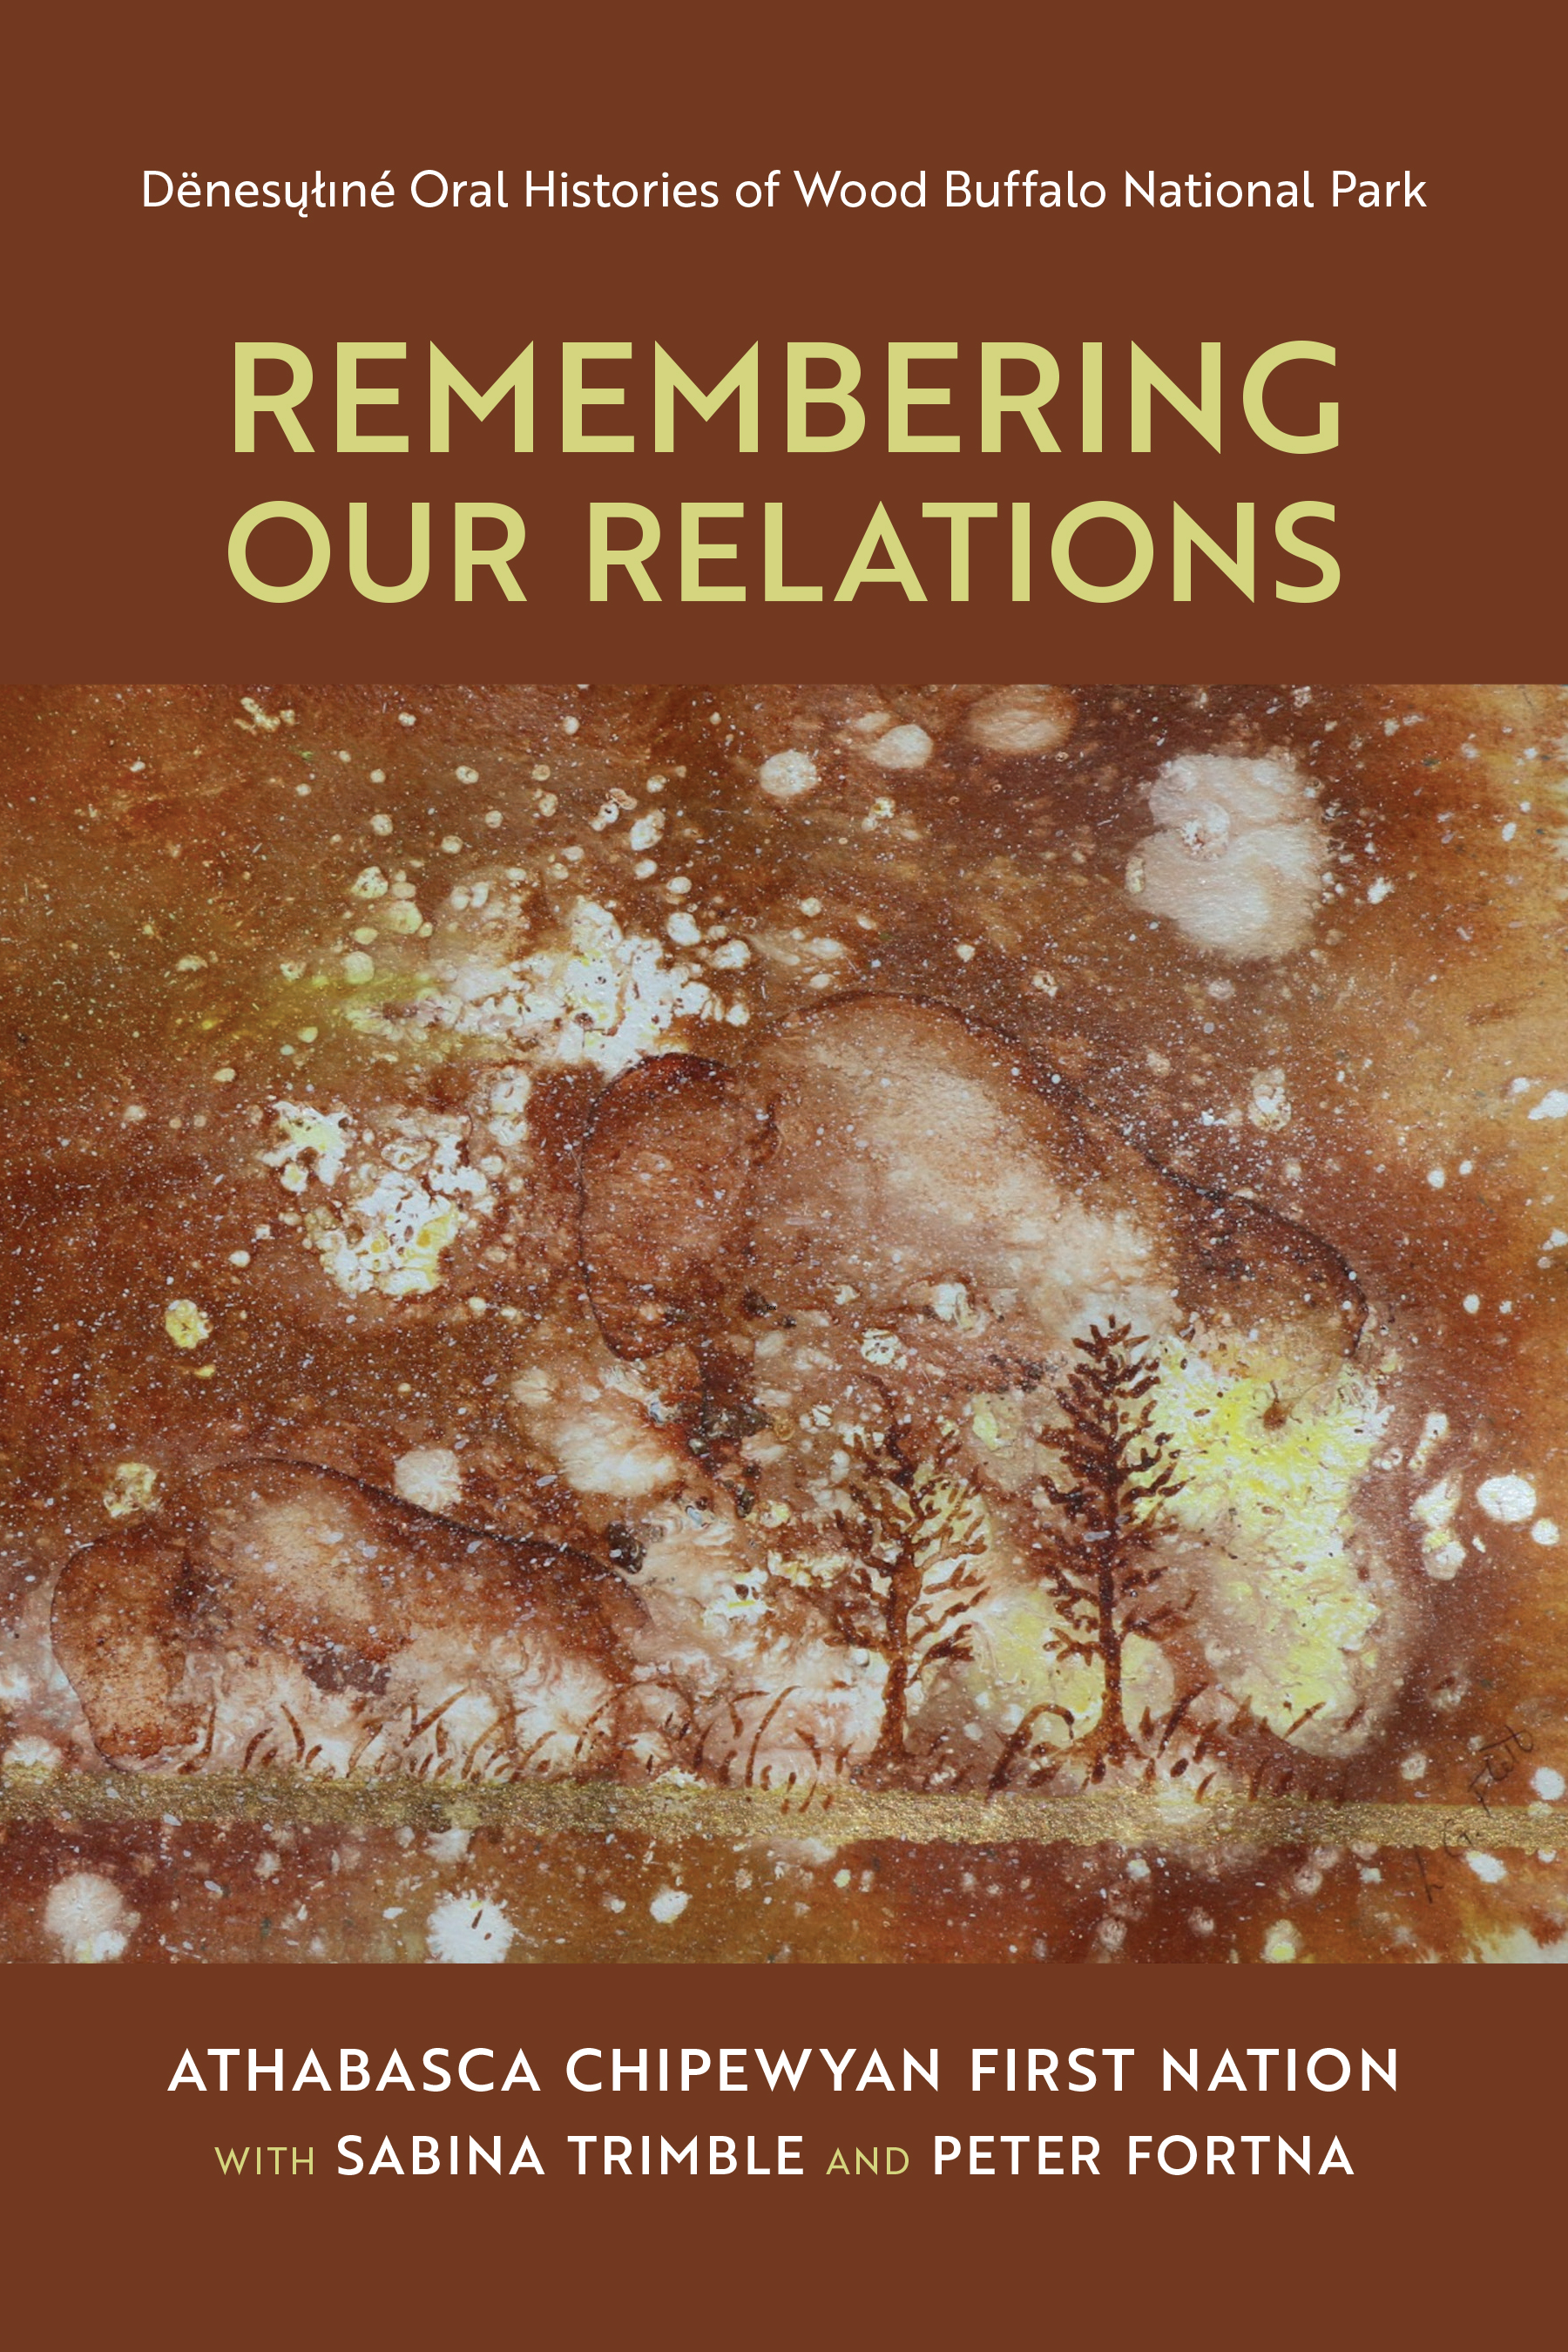 Book cover image for: Remembering Our Relations